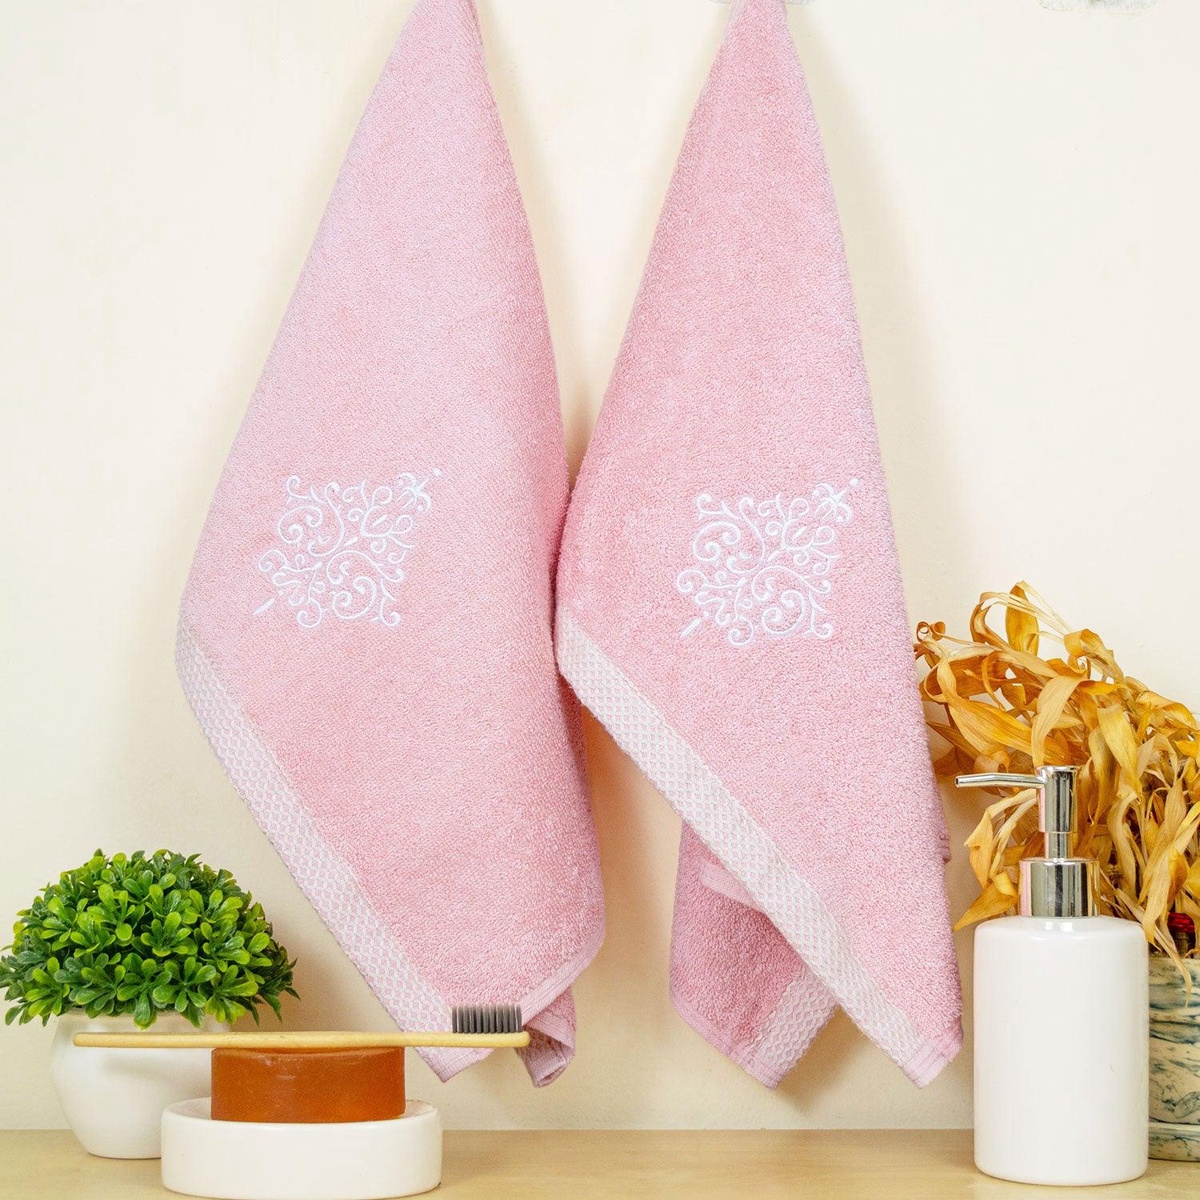 Upgrade Your Day-to-Day with These Towel Techniques